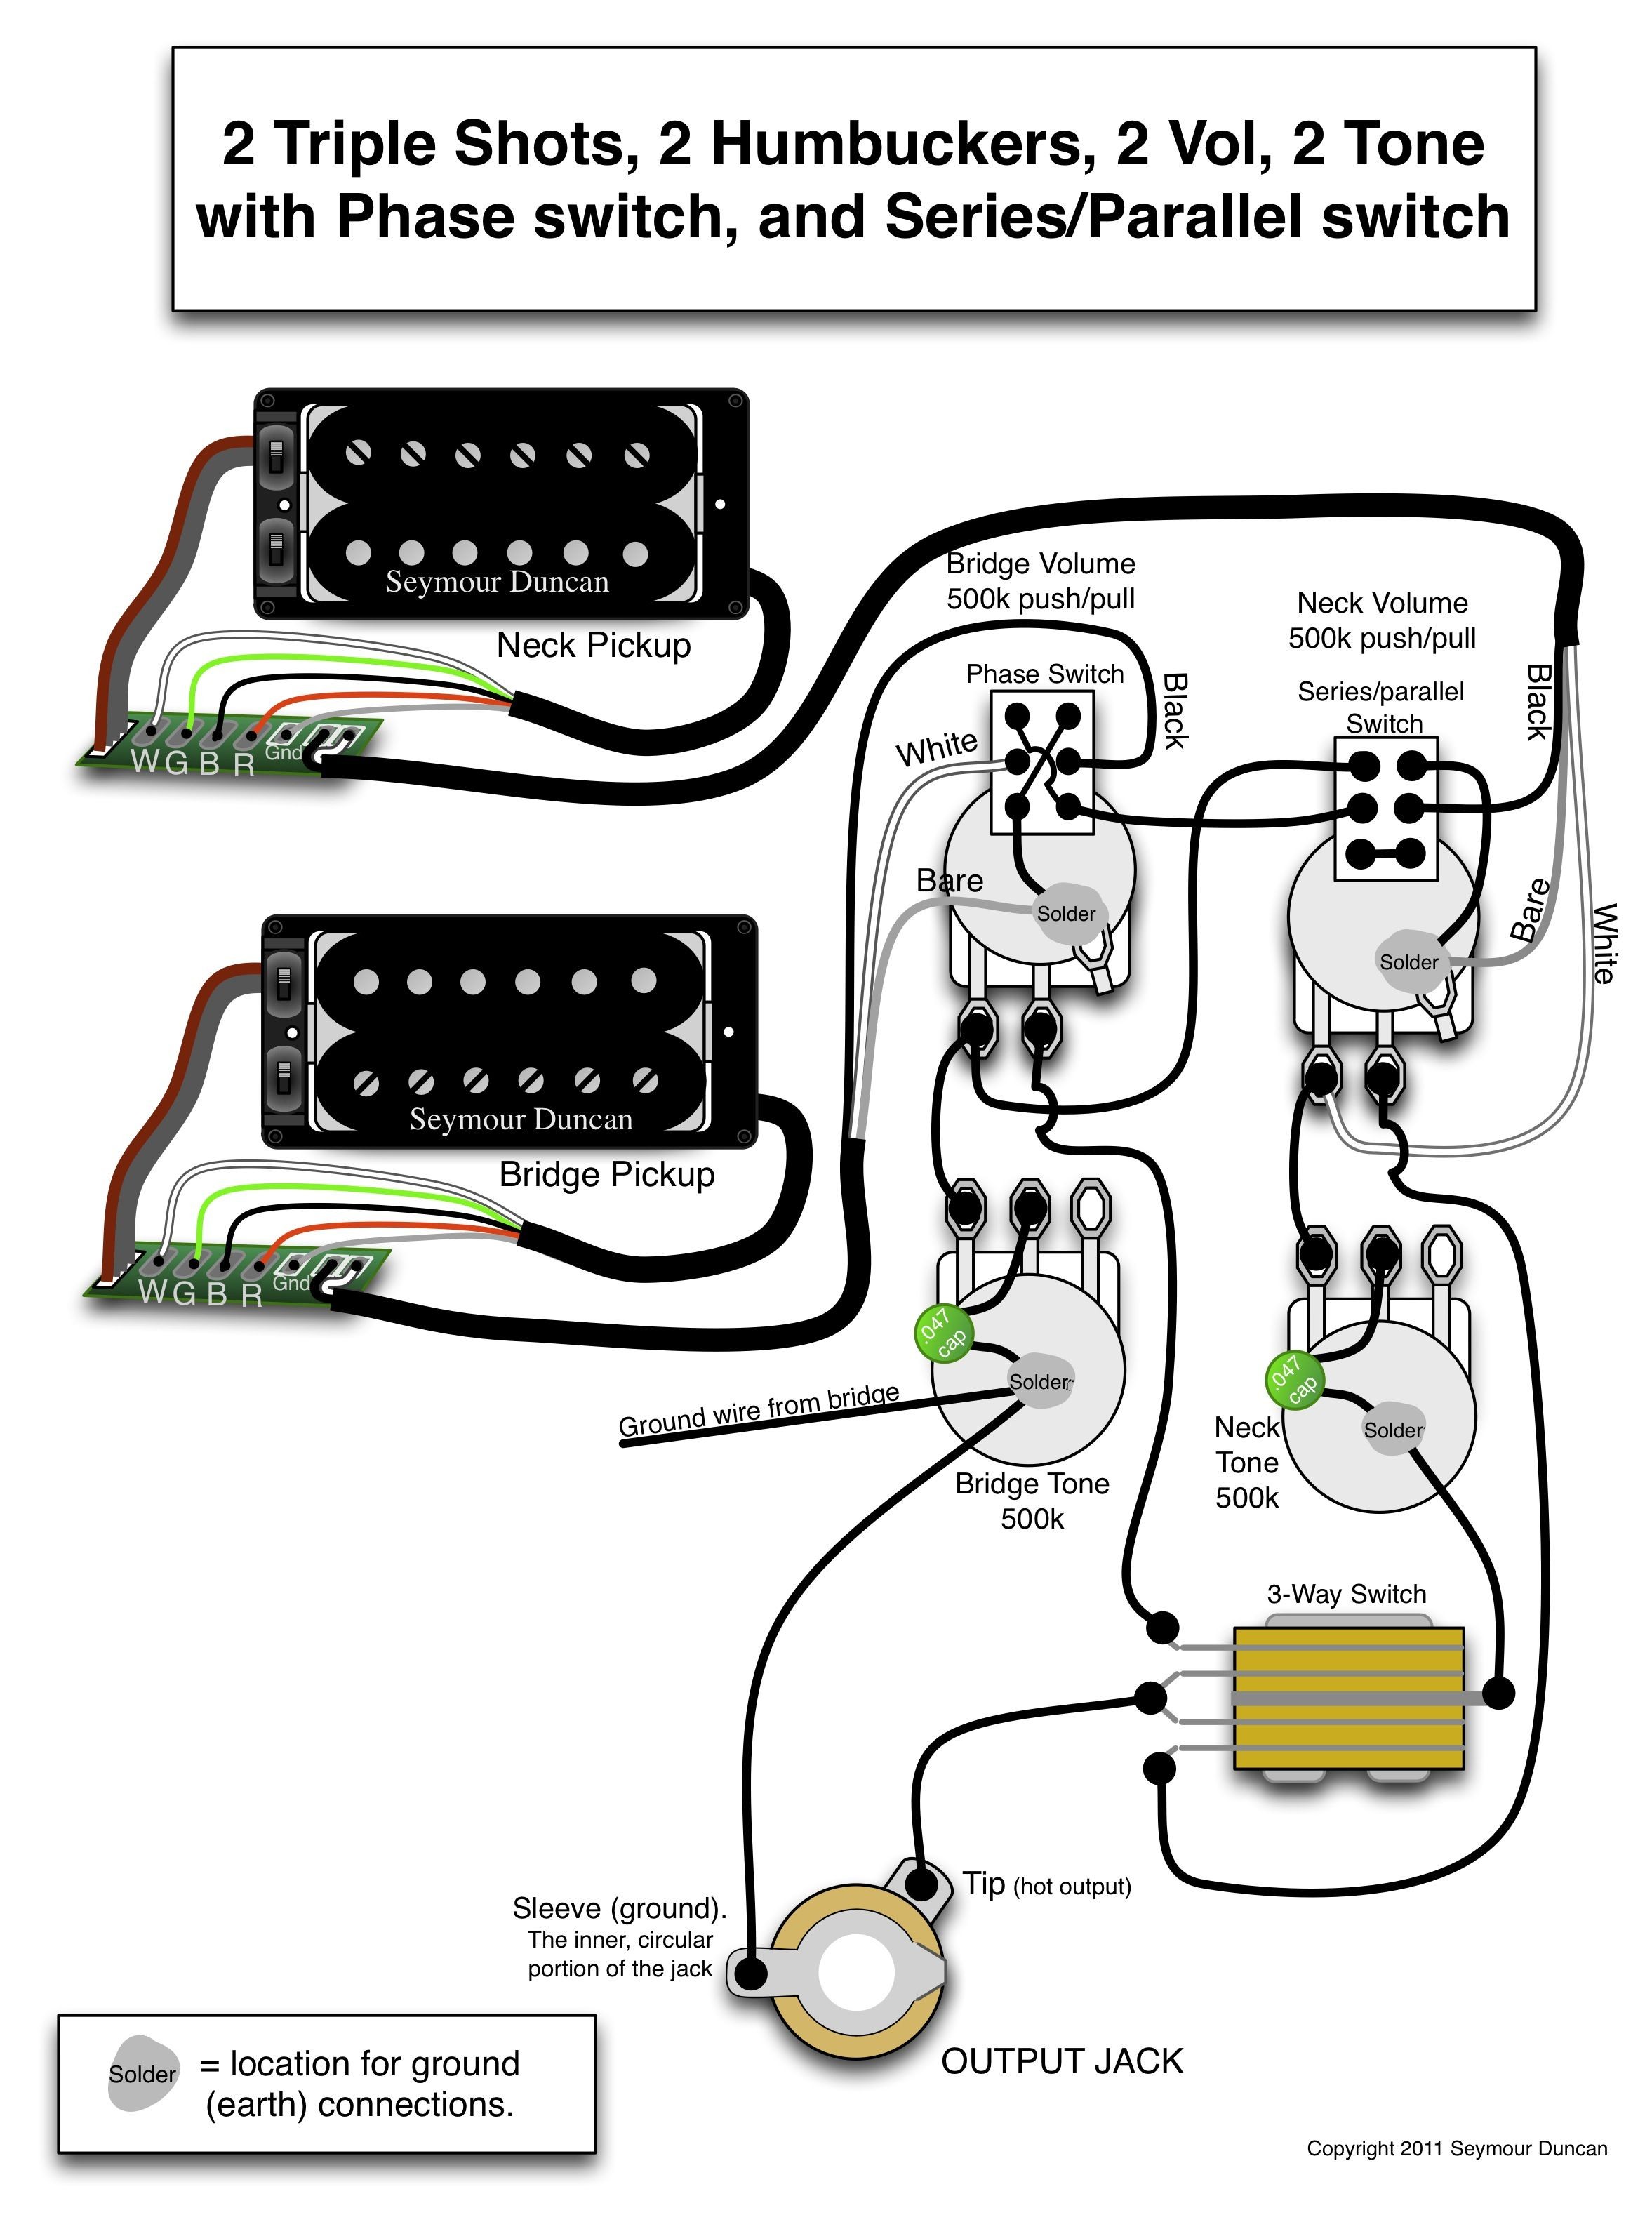 Wiring Diagram for 2 humbuckers 2 tone 2 volume 3 way switch i e traditional LP set up find more at wiring di…